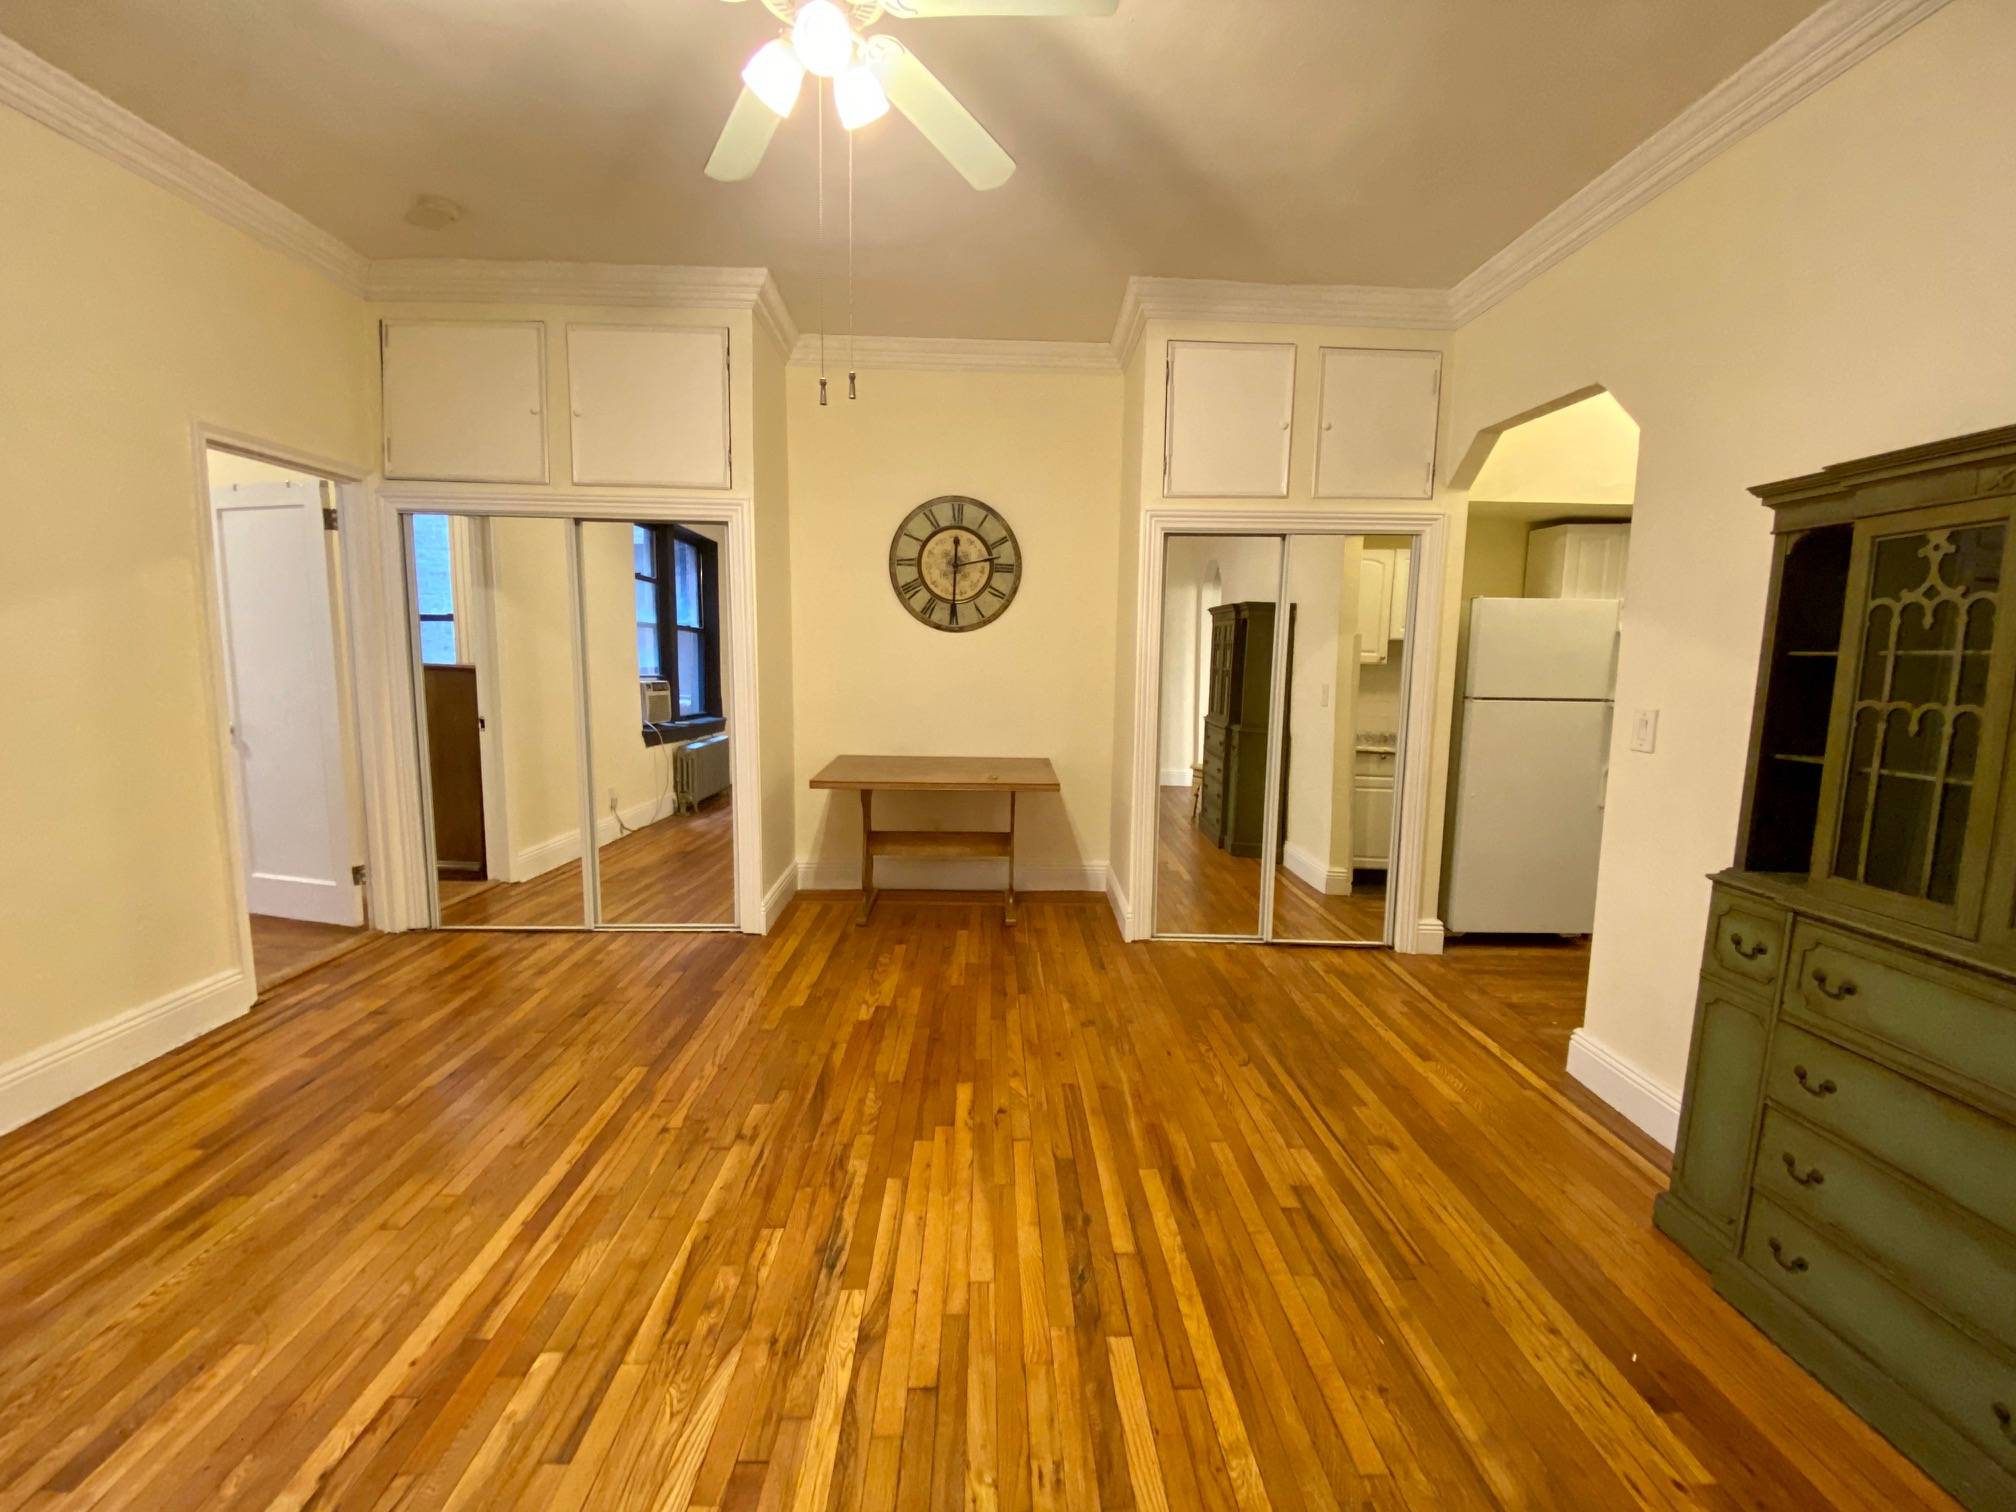 CYOF Live near it all in this spacious, charming, one bedroom apartment with a high ceilings, and a decorative fireplace.